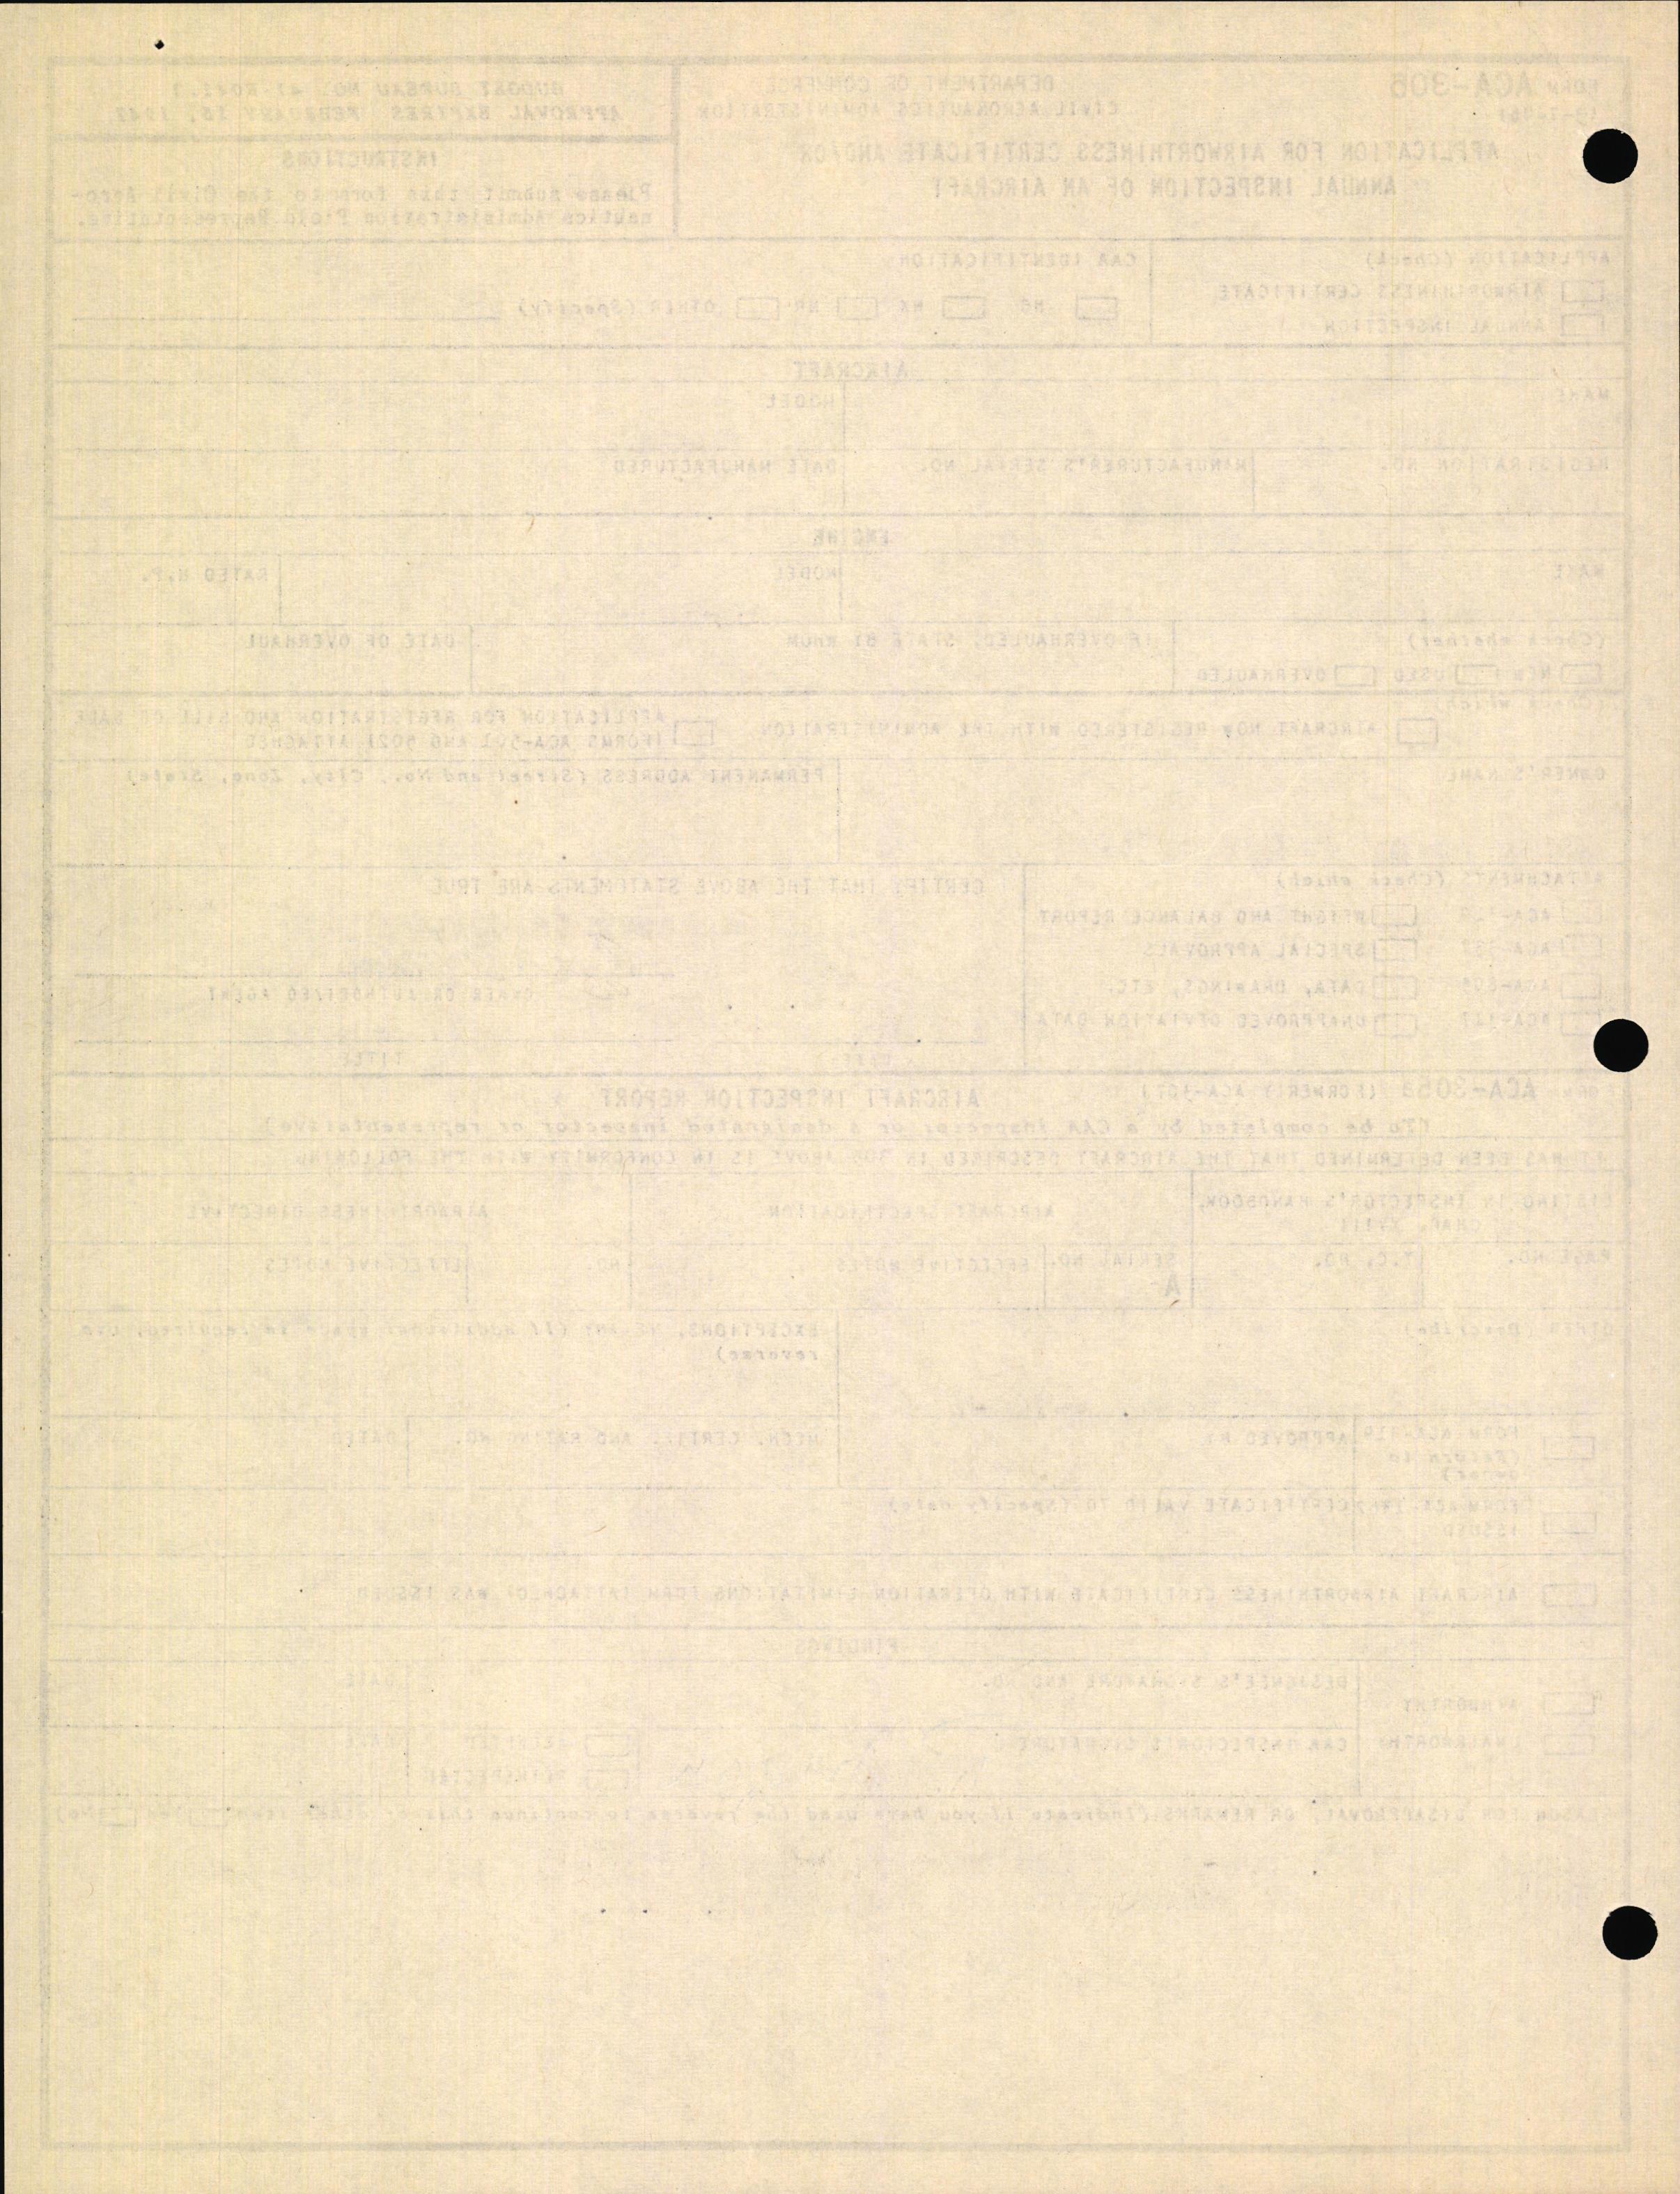 Sample page 4 from AirCorps Library document: Technical Information for Serial Number 2254